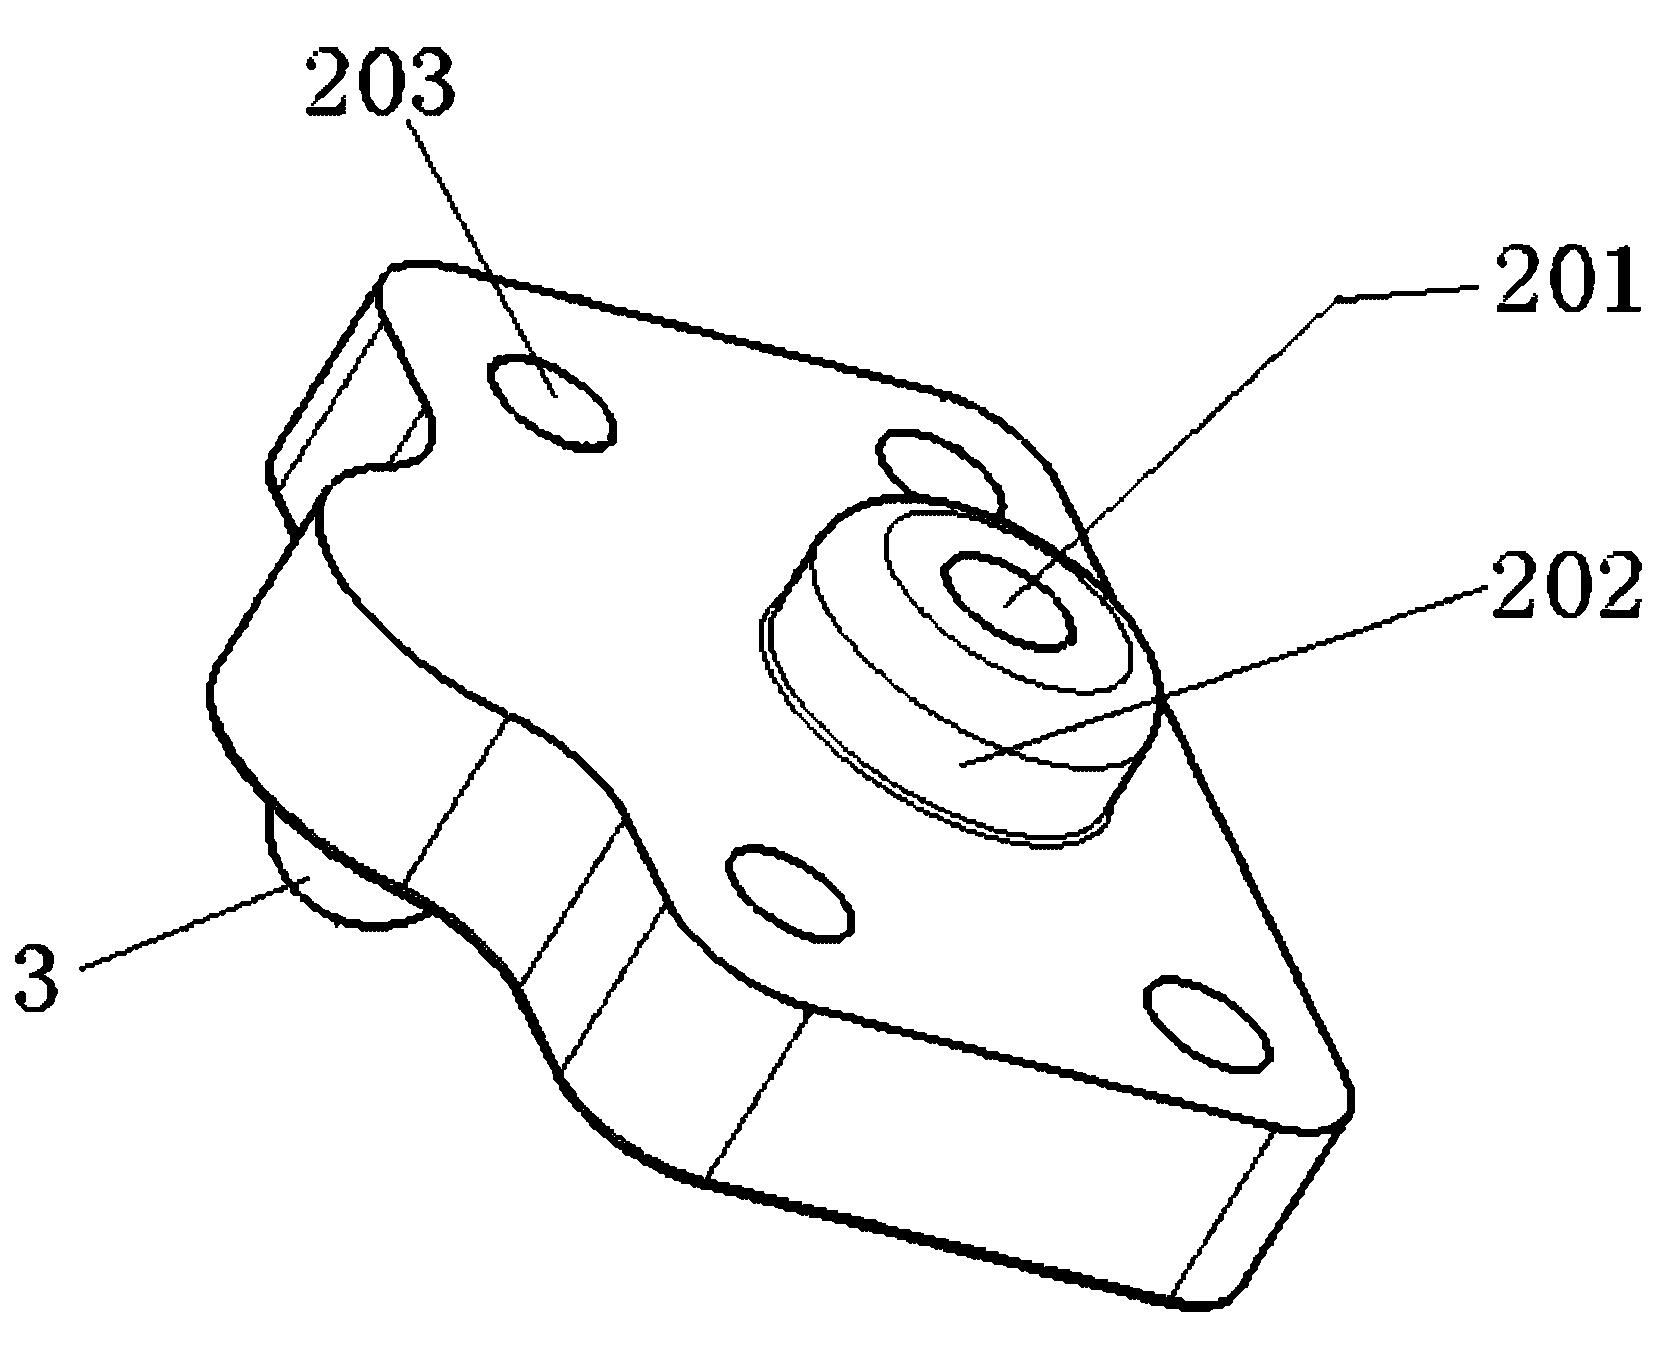 Diesel engine oil injector hold-down device